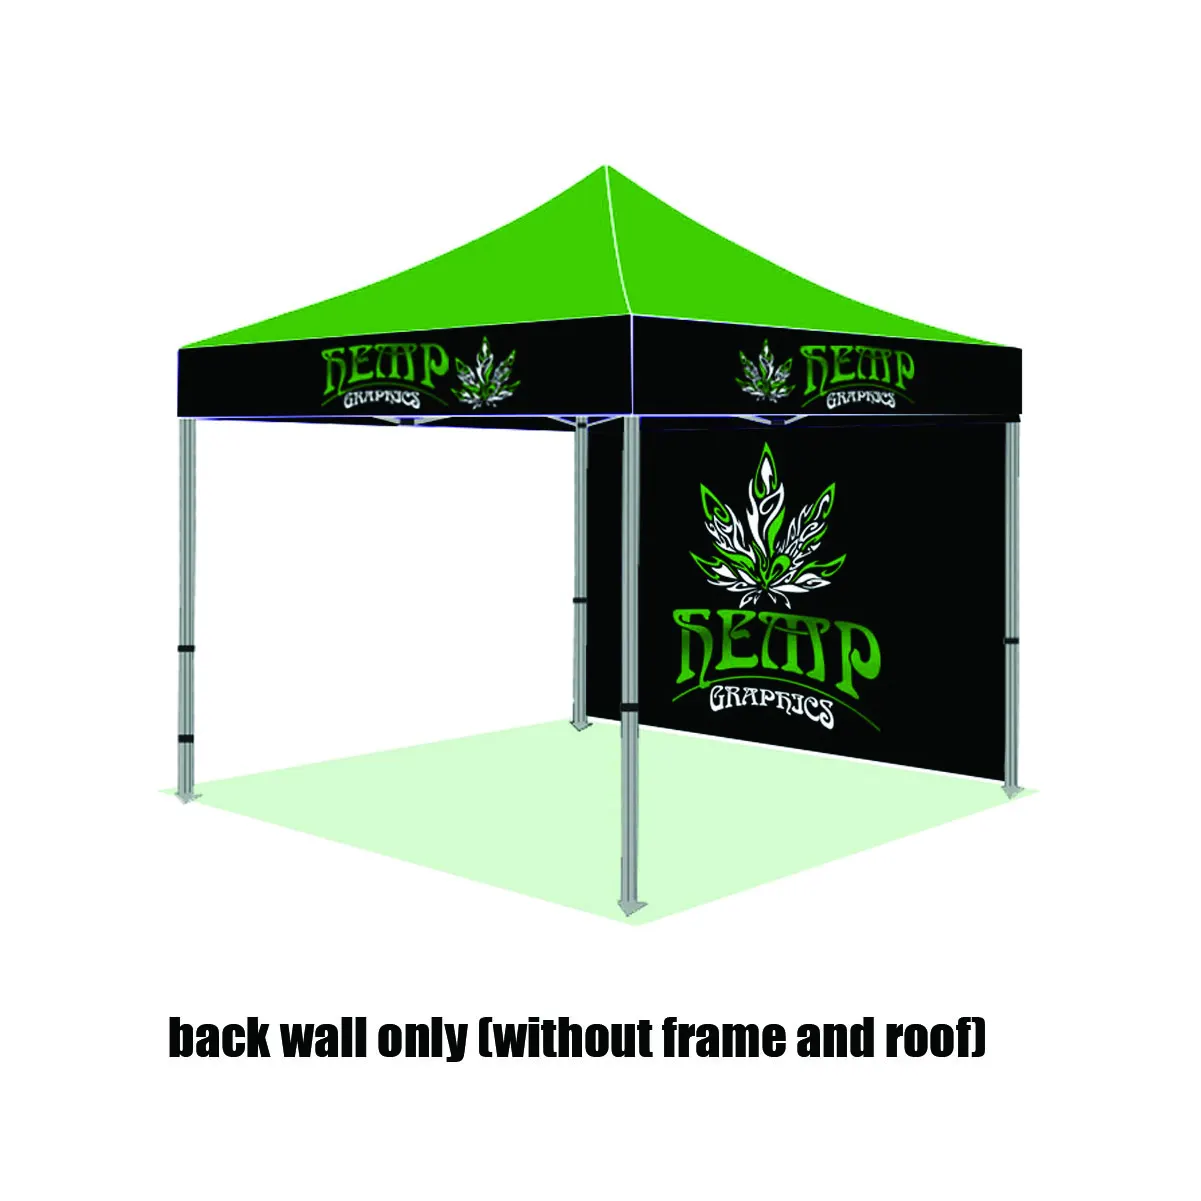 10*10ft(3*3m) Custom Printed Advertising Pop Up Trade Show Tent Event Canopy Gazebo Marquee Tent（back wall only)